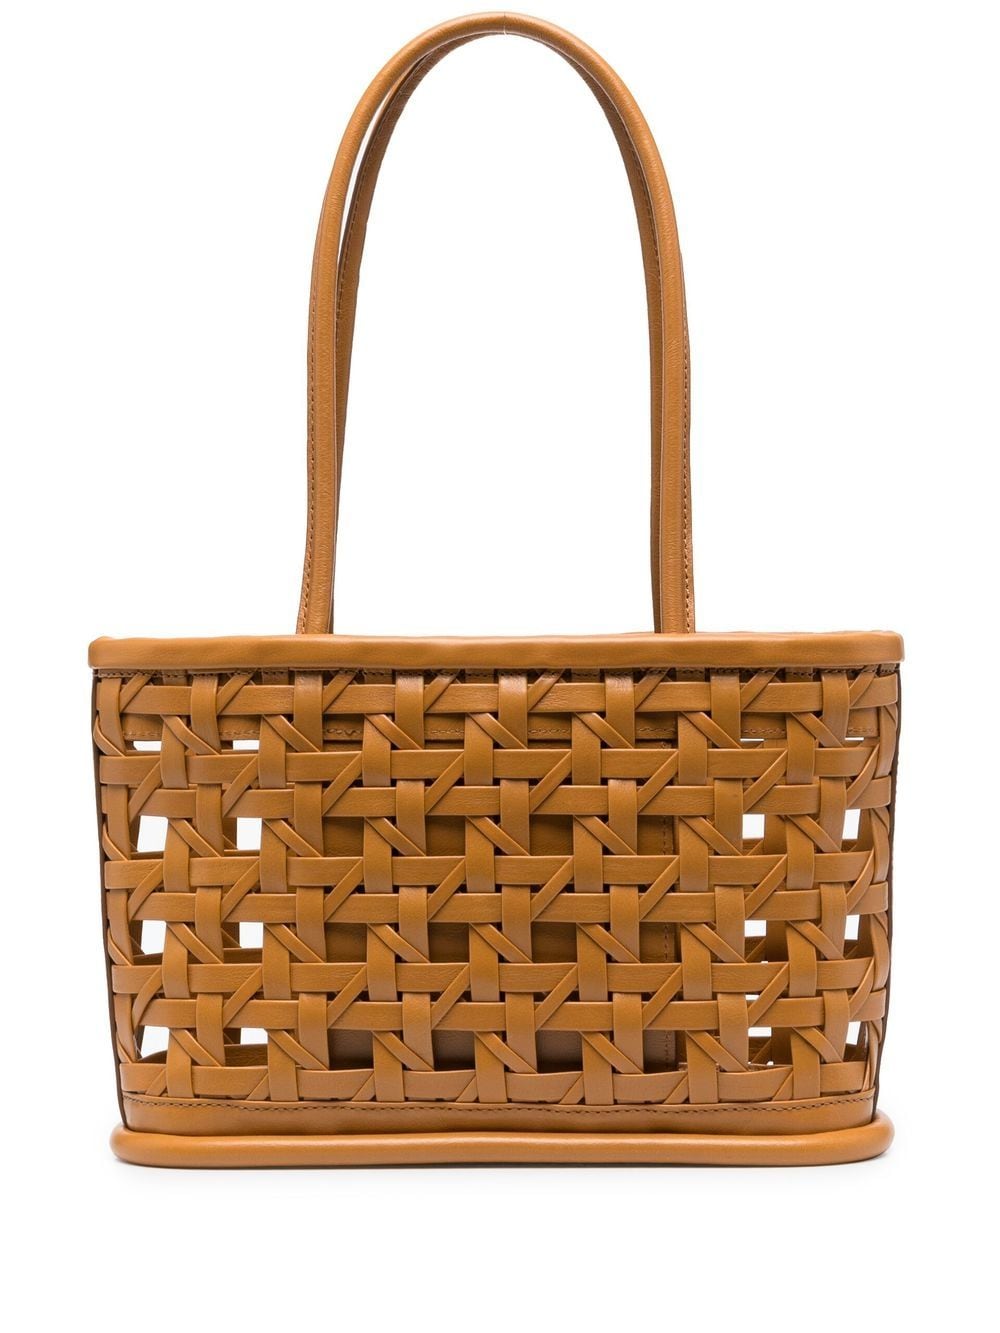 LEMELS interwoven leather tote bag